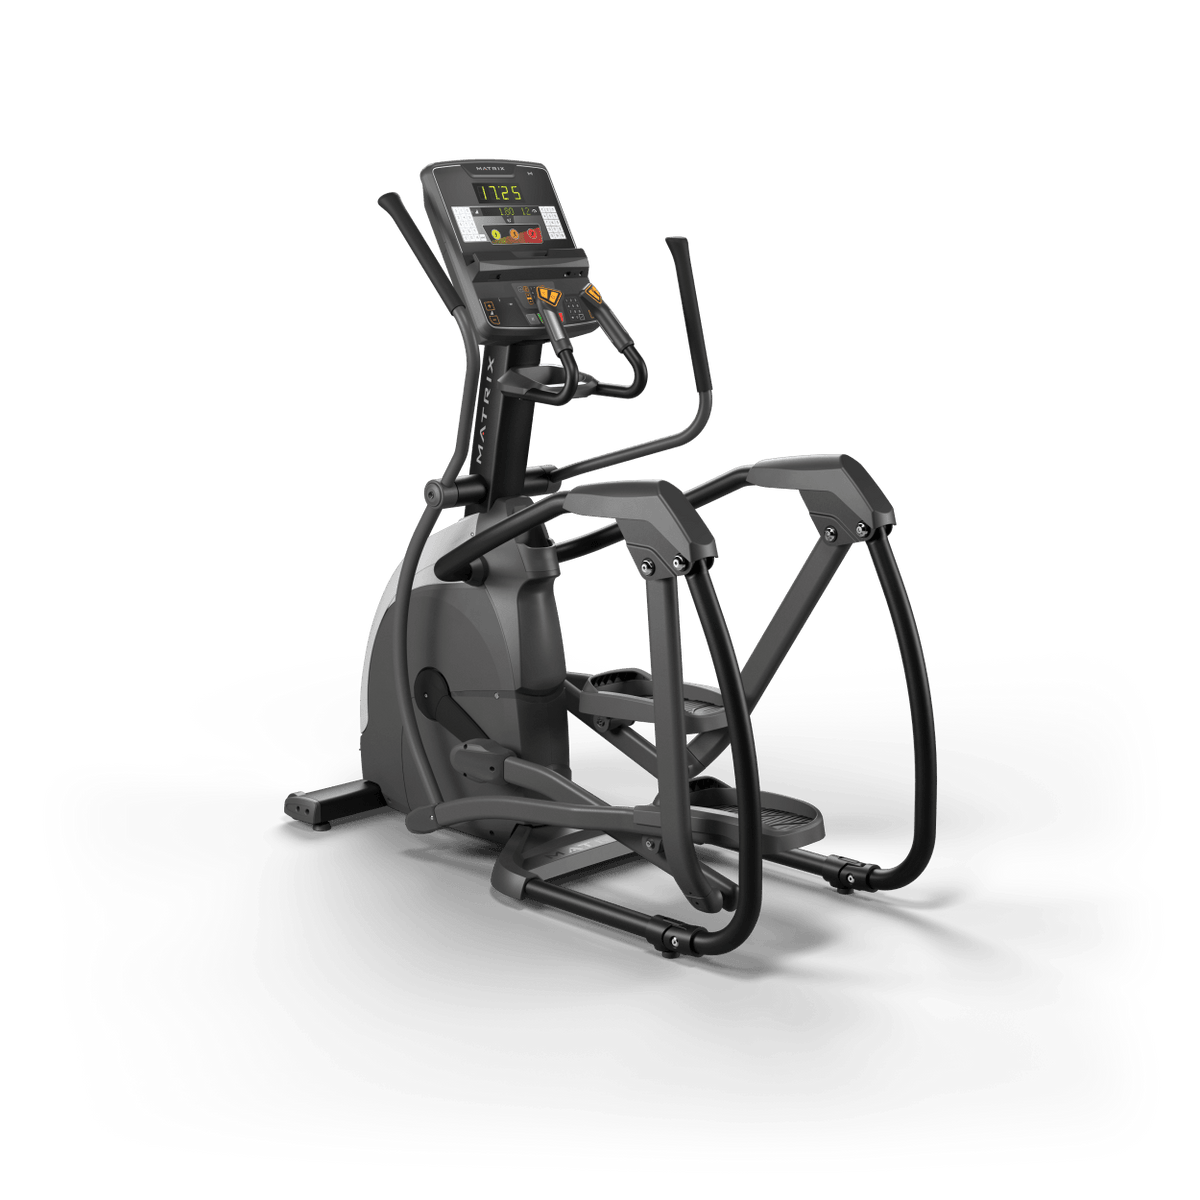 Matrix Fitness Endurance Elliptical with Group Training Console full view | Fitness Experience